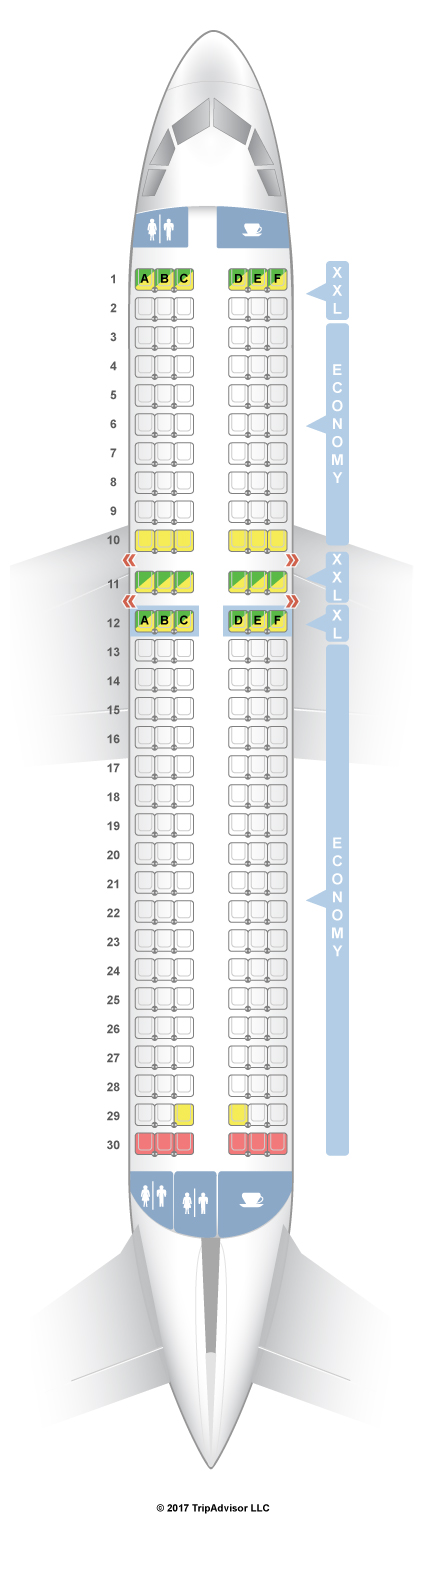 Aircraft Airbus A320neo Seat Map - Image to u